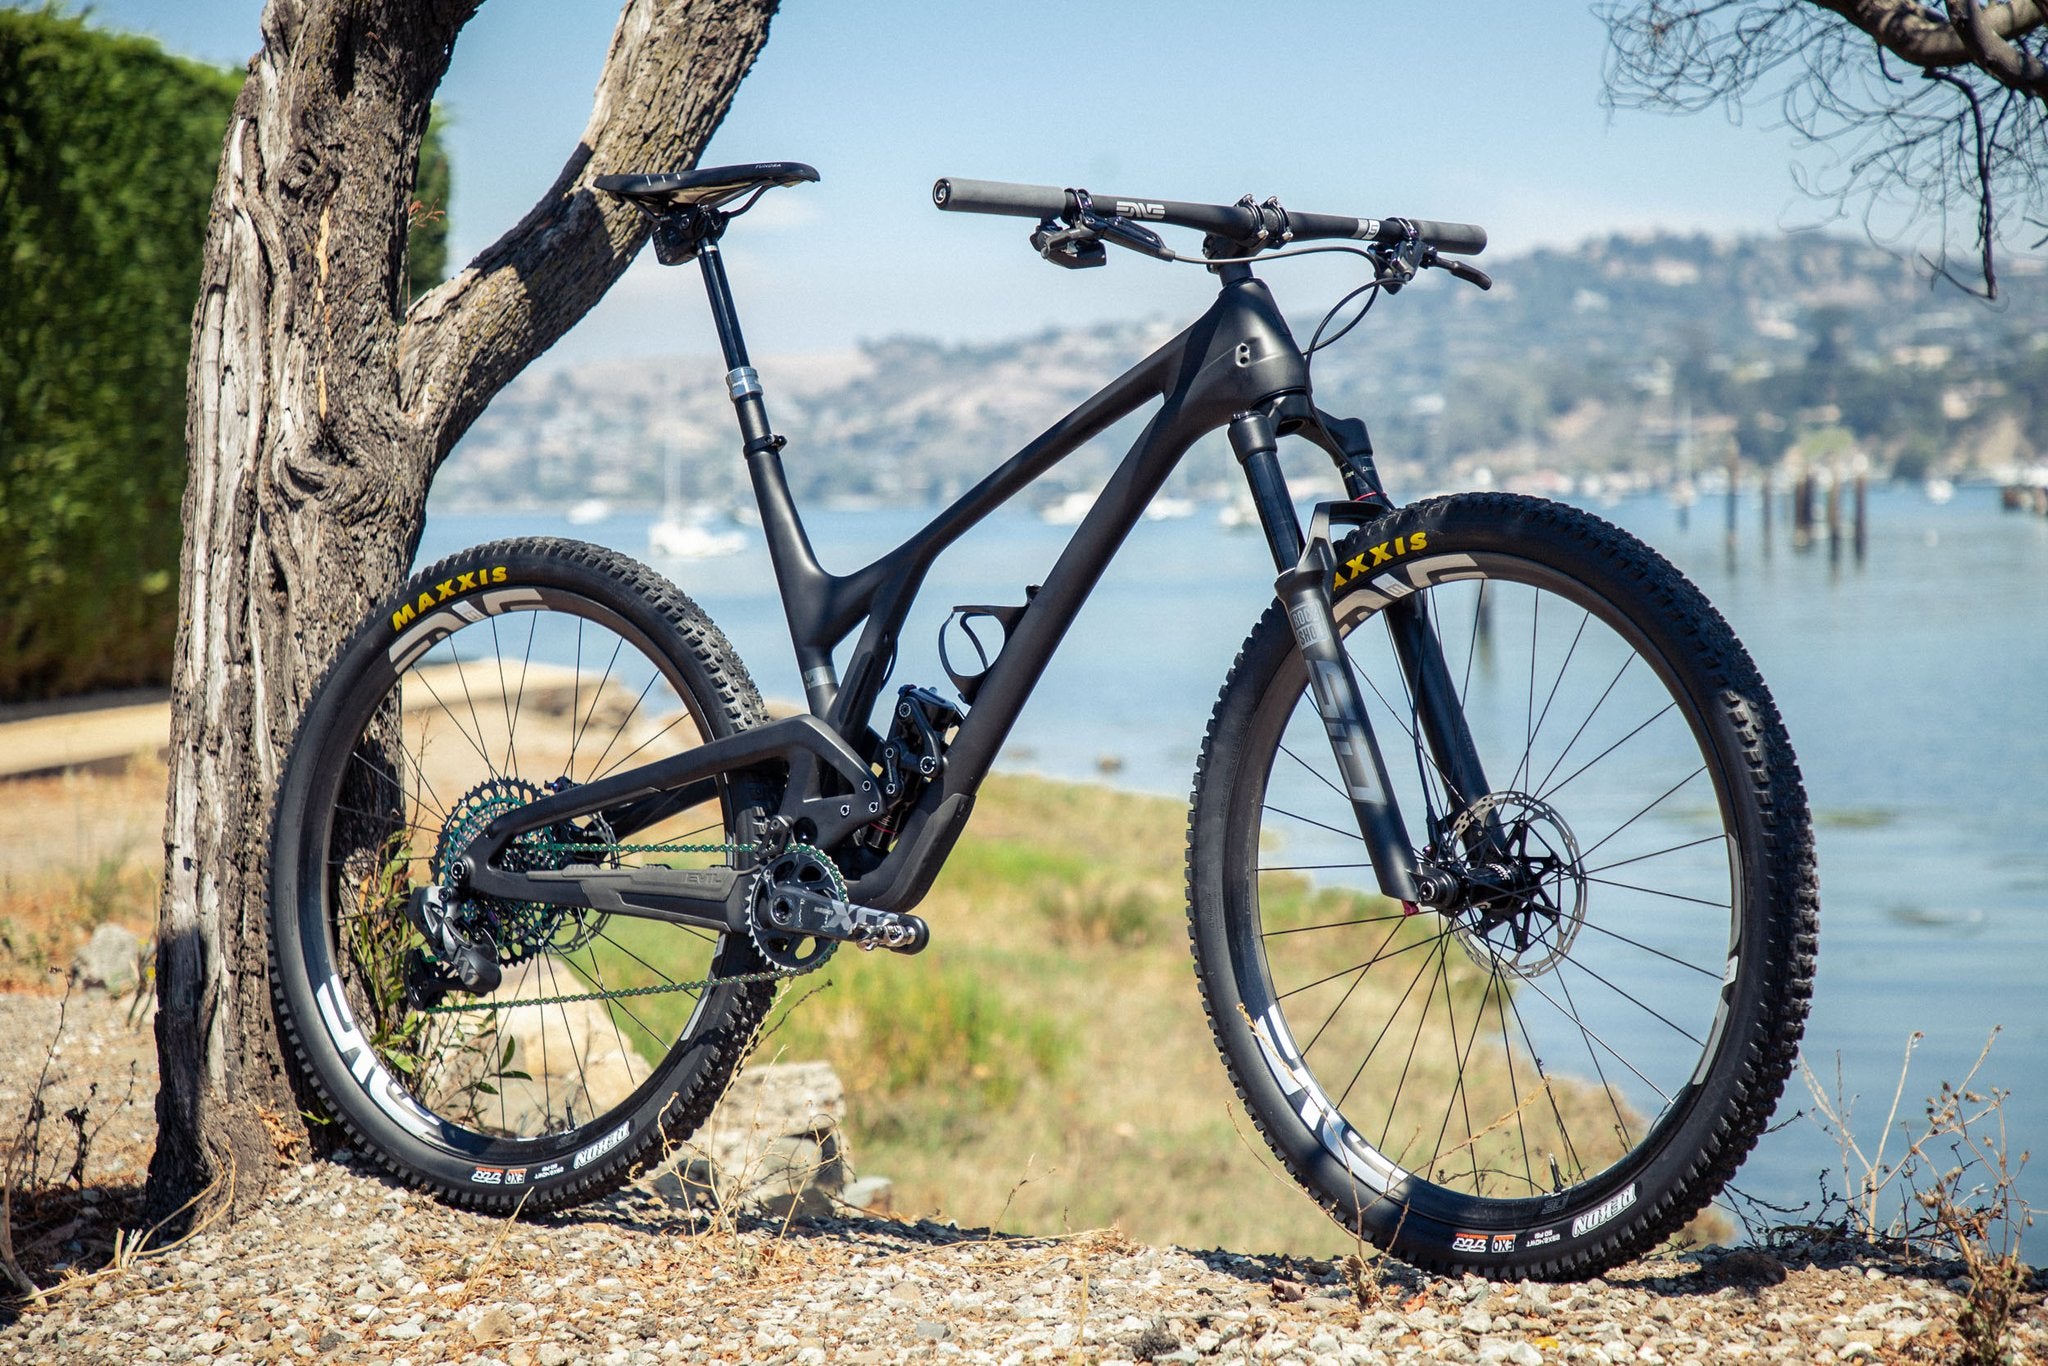 Gallery: A Stealthy Black AXS Evil 29er